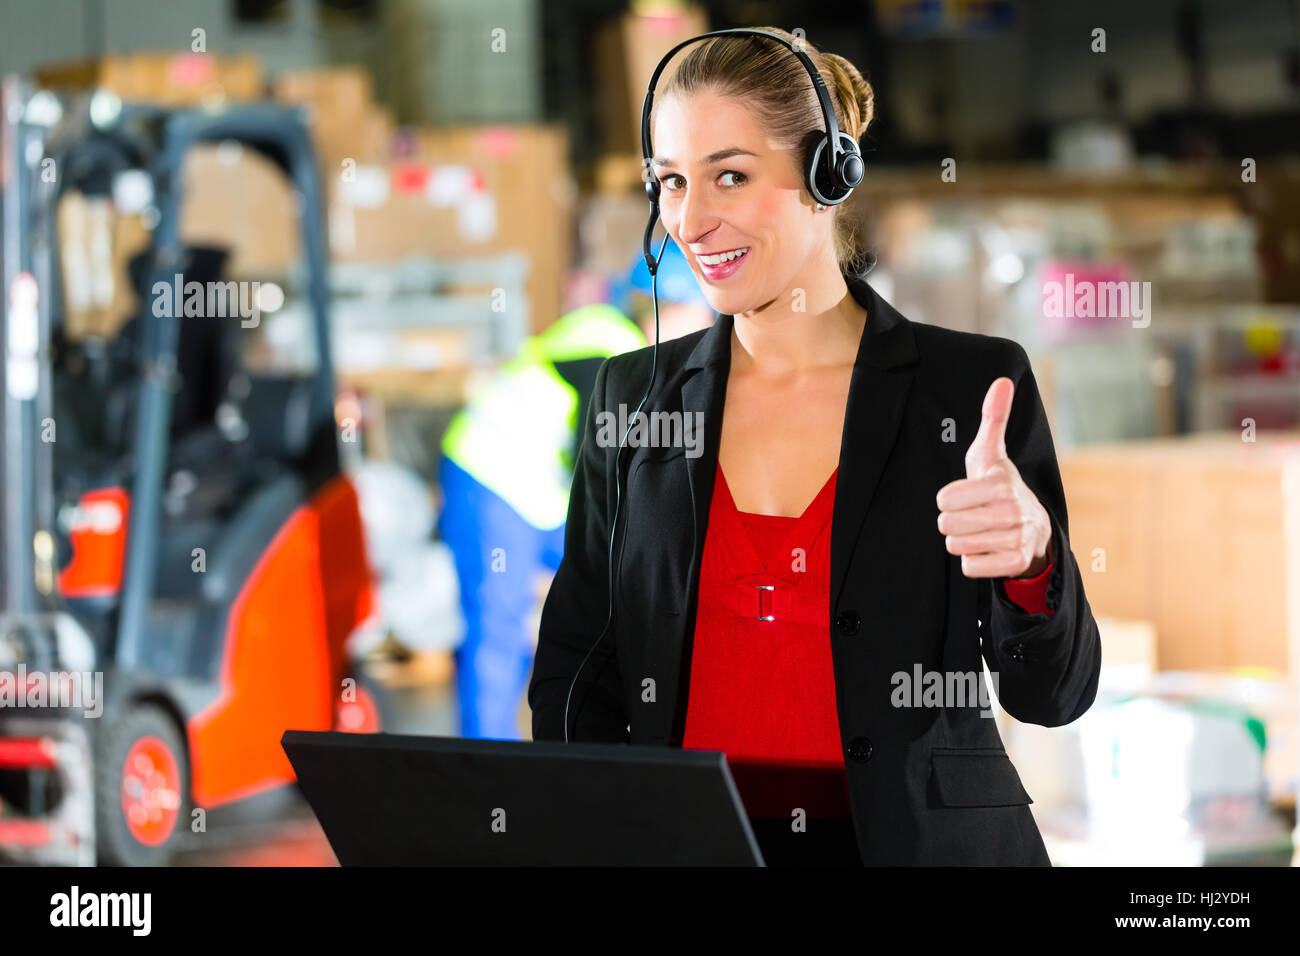 woman with headset in a warehouse spedition Stock Photo